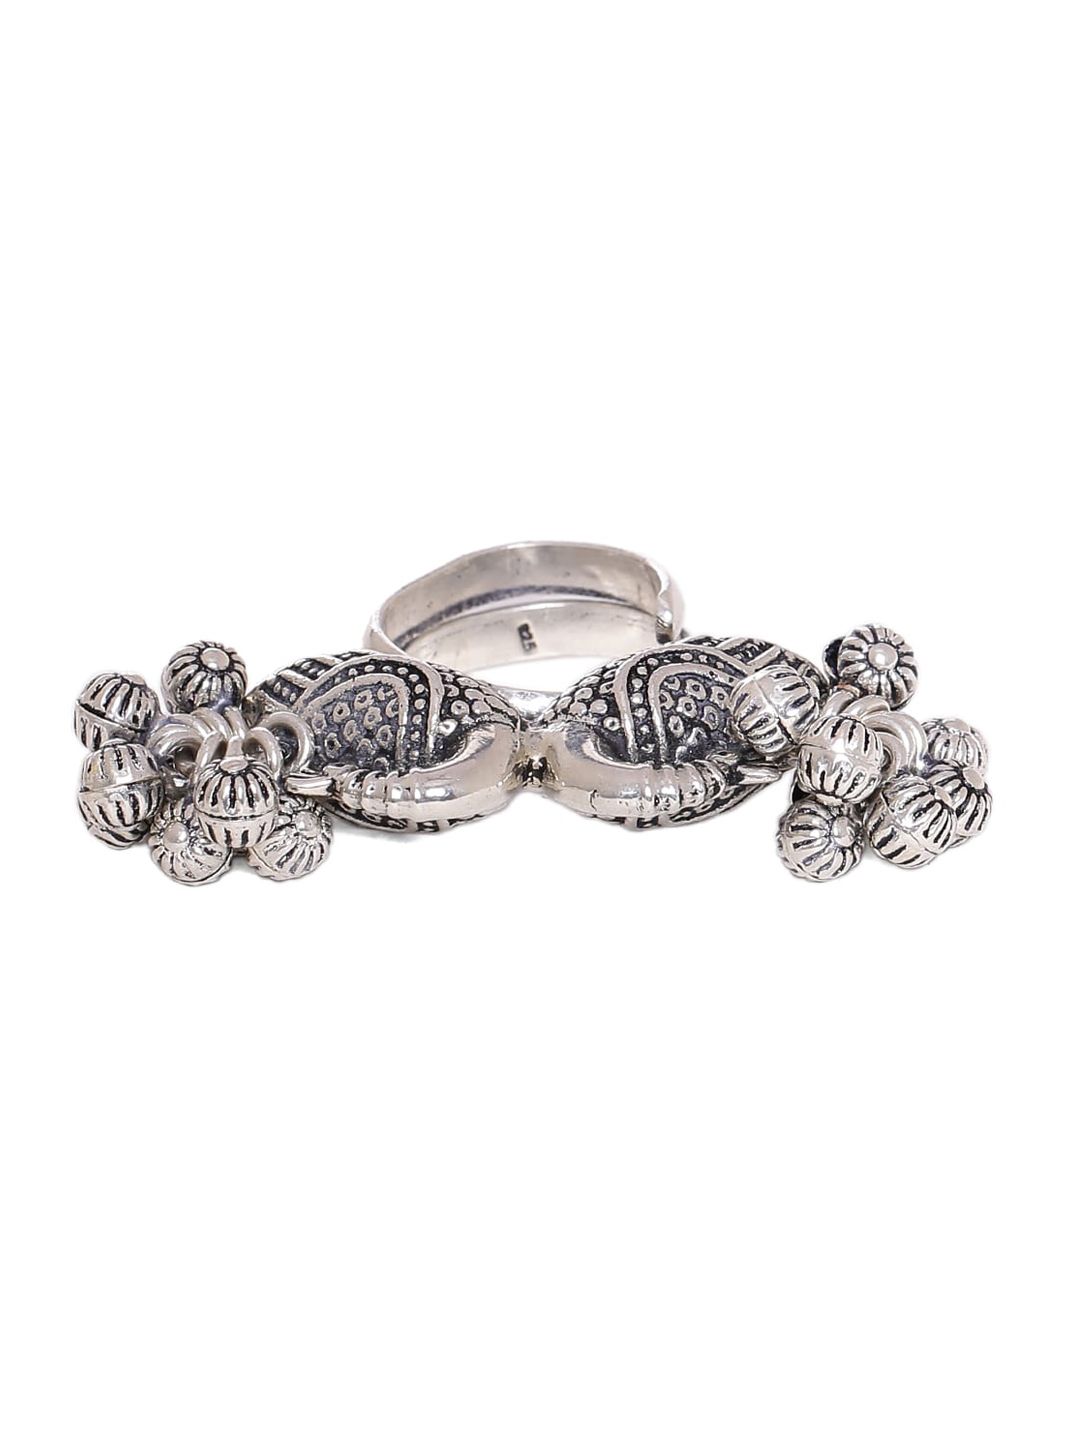 ADORN by Nikita Ladiwala Silver-Toned Oxidized Ghungroo-Studded Finger Ring Price in India